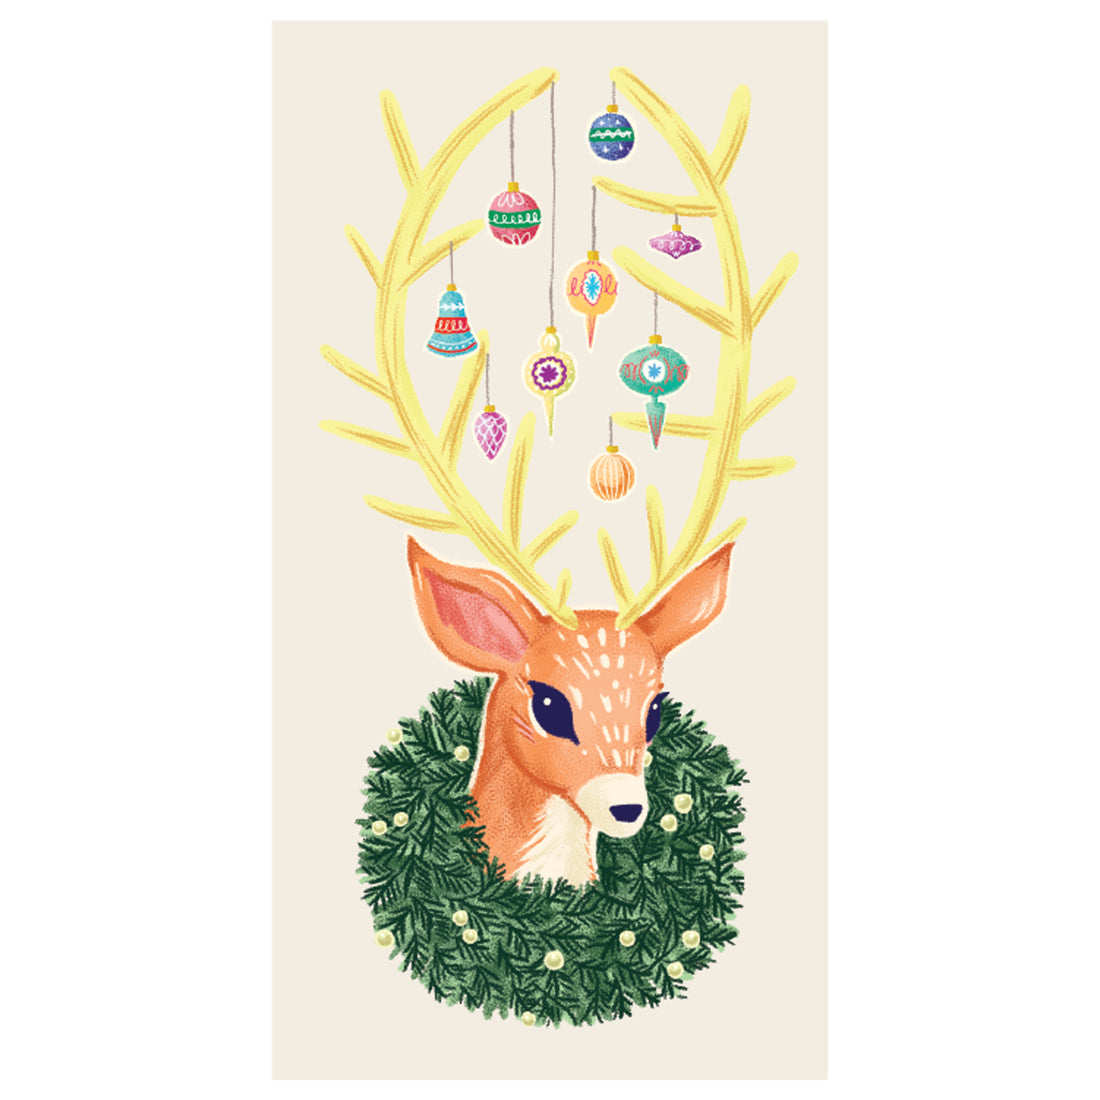 A rectangle guest napkin featuring a cute, vintage illustration of a reindeer&